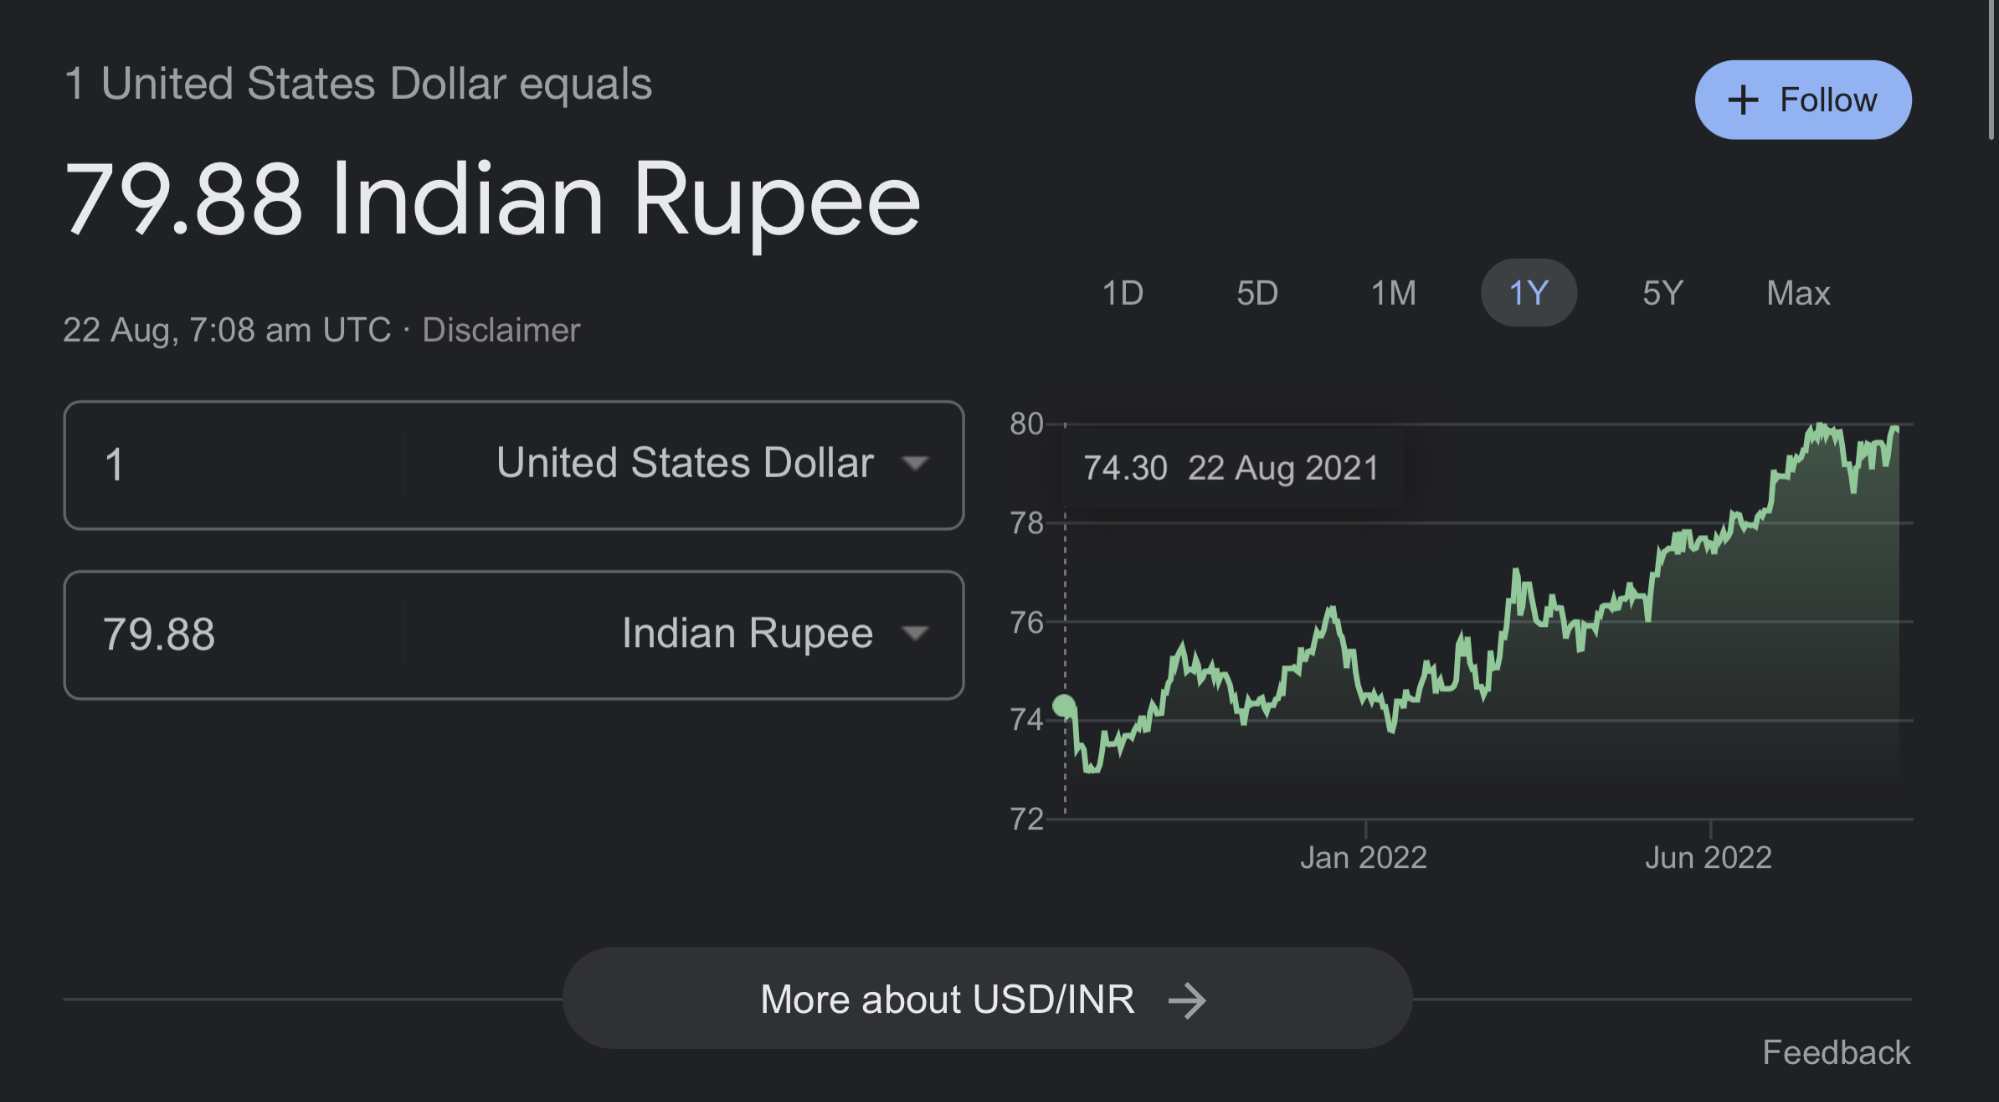 Falling Rupee increases the cost of studying abroad for Indian students